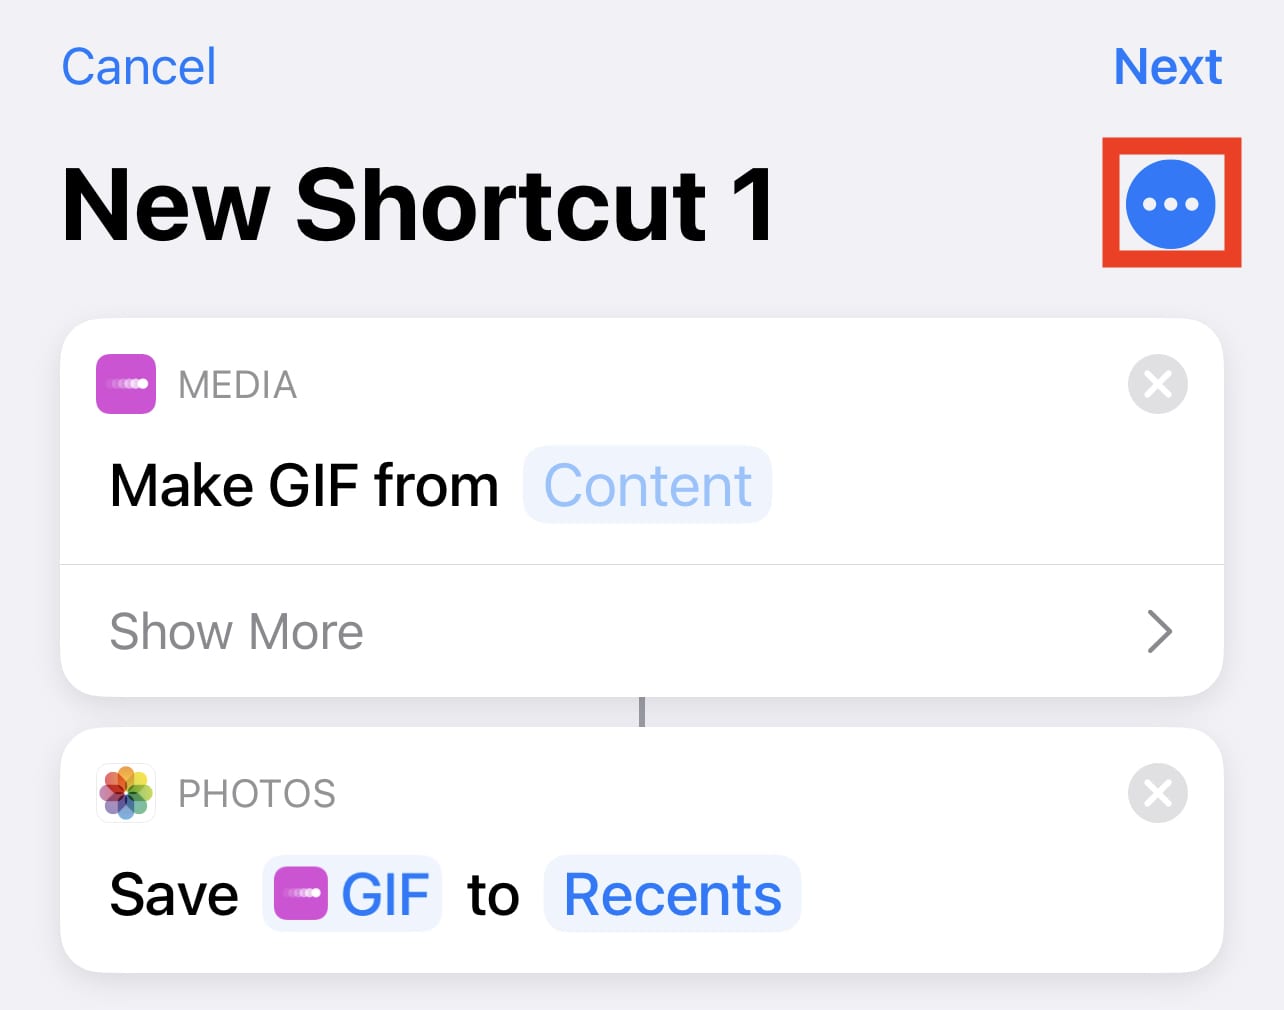 Tapping the ... button allows us to name and save the shortcut